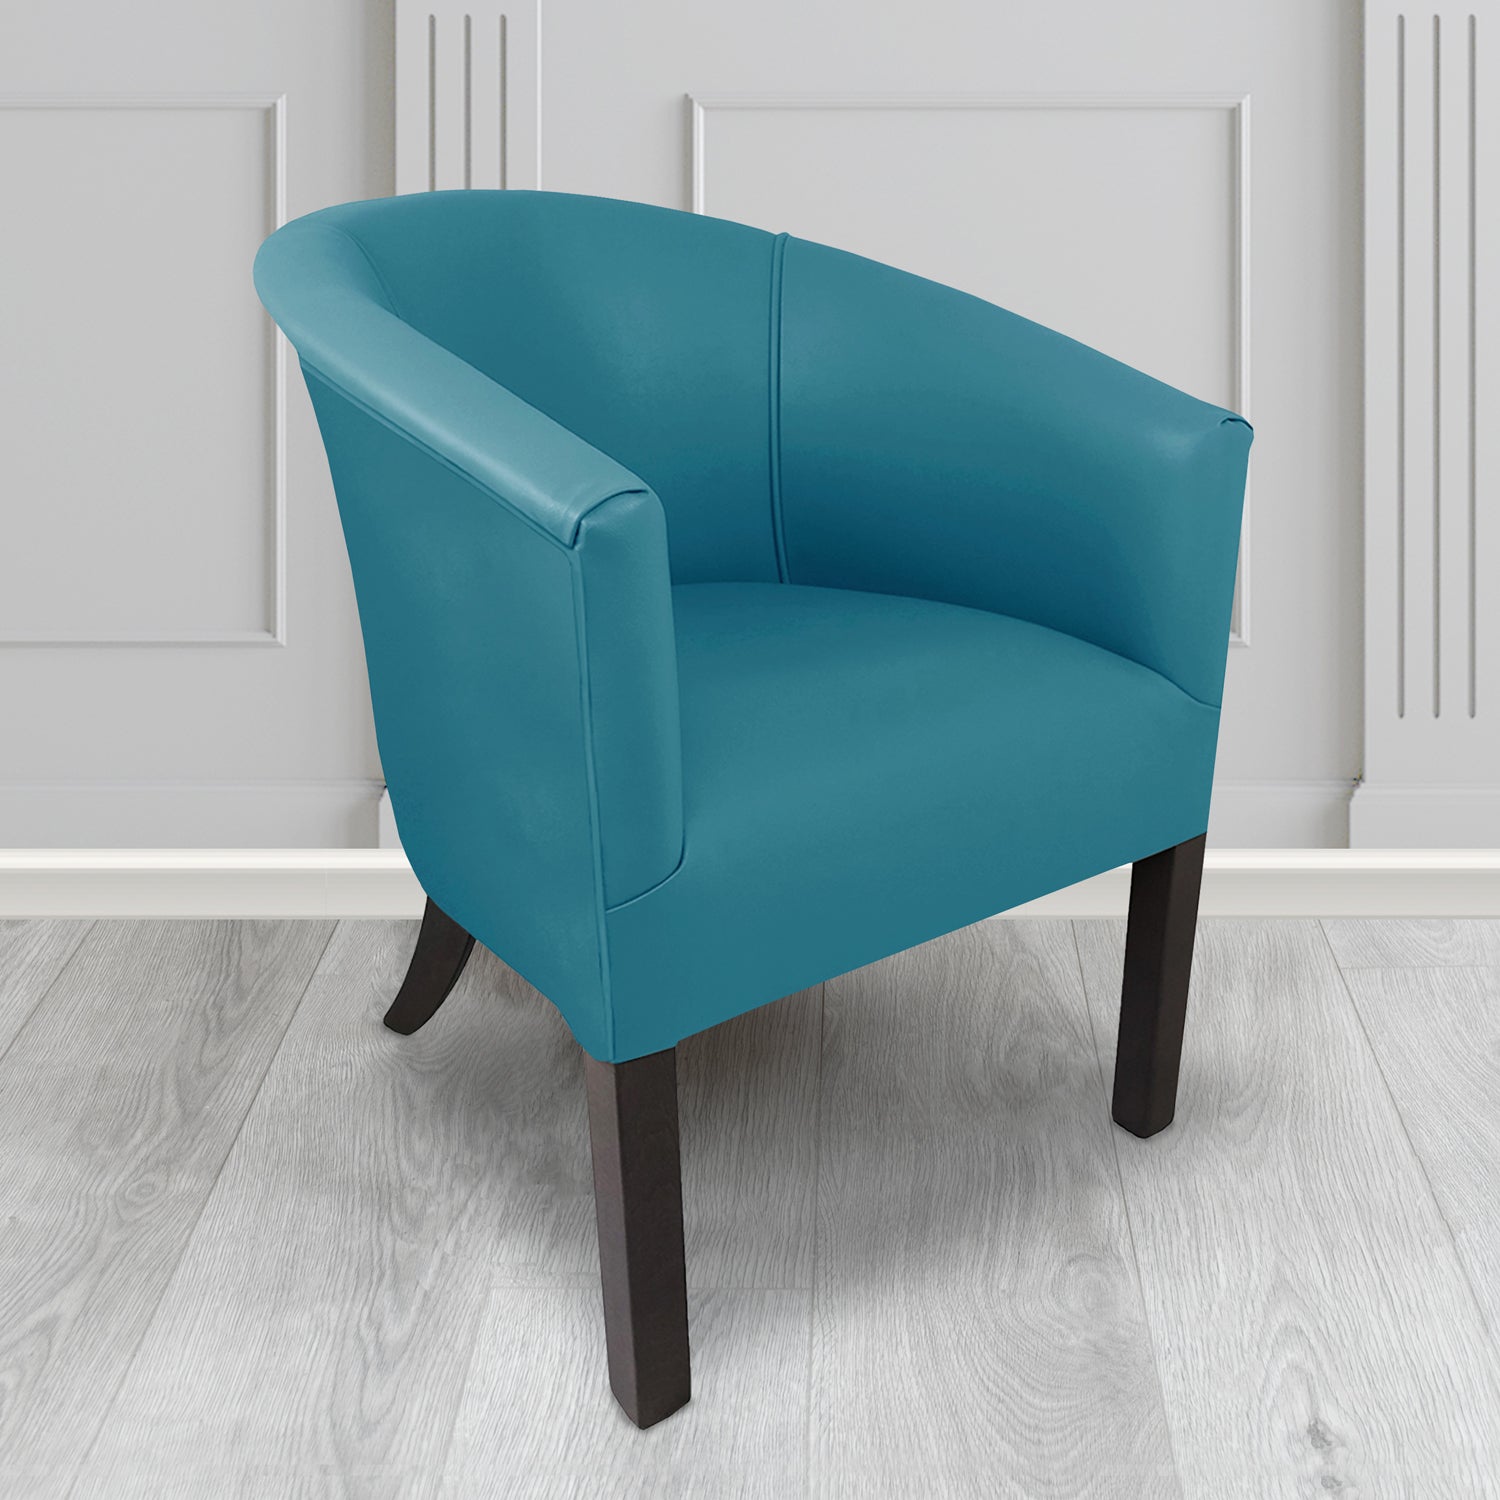 Lewisham Tub Chair in Agua Paint Pot Teal Crib 5 Faux Leather - Antimicrobial, Stain Resistant & Waterproof - The Tub Chair Shop